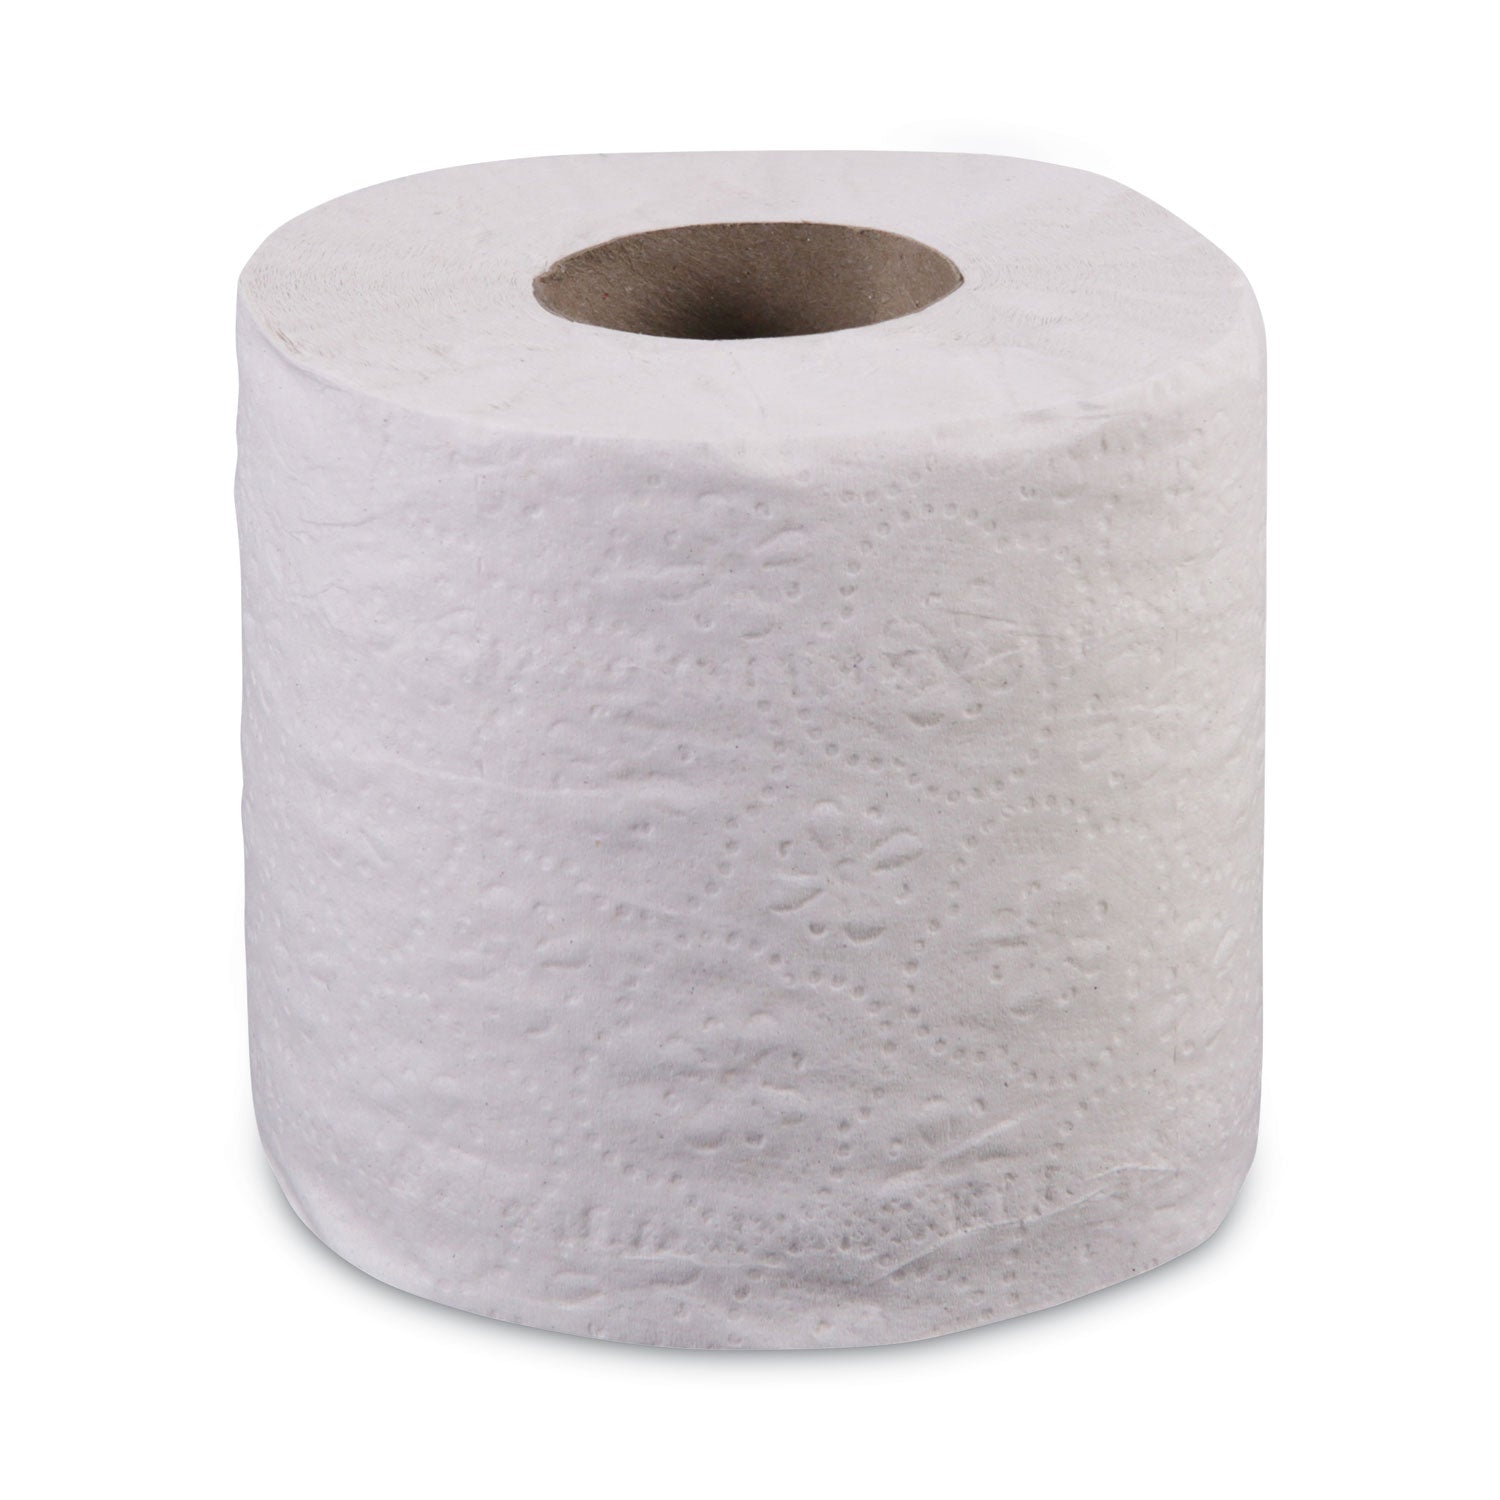 2-Ply Toilet Tissue, Septic Safe, White, 400 Sheets/Roll, 96 Rolls/Carton - 